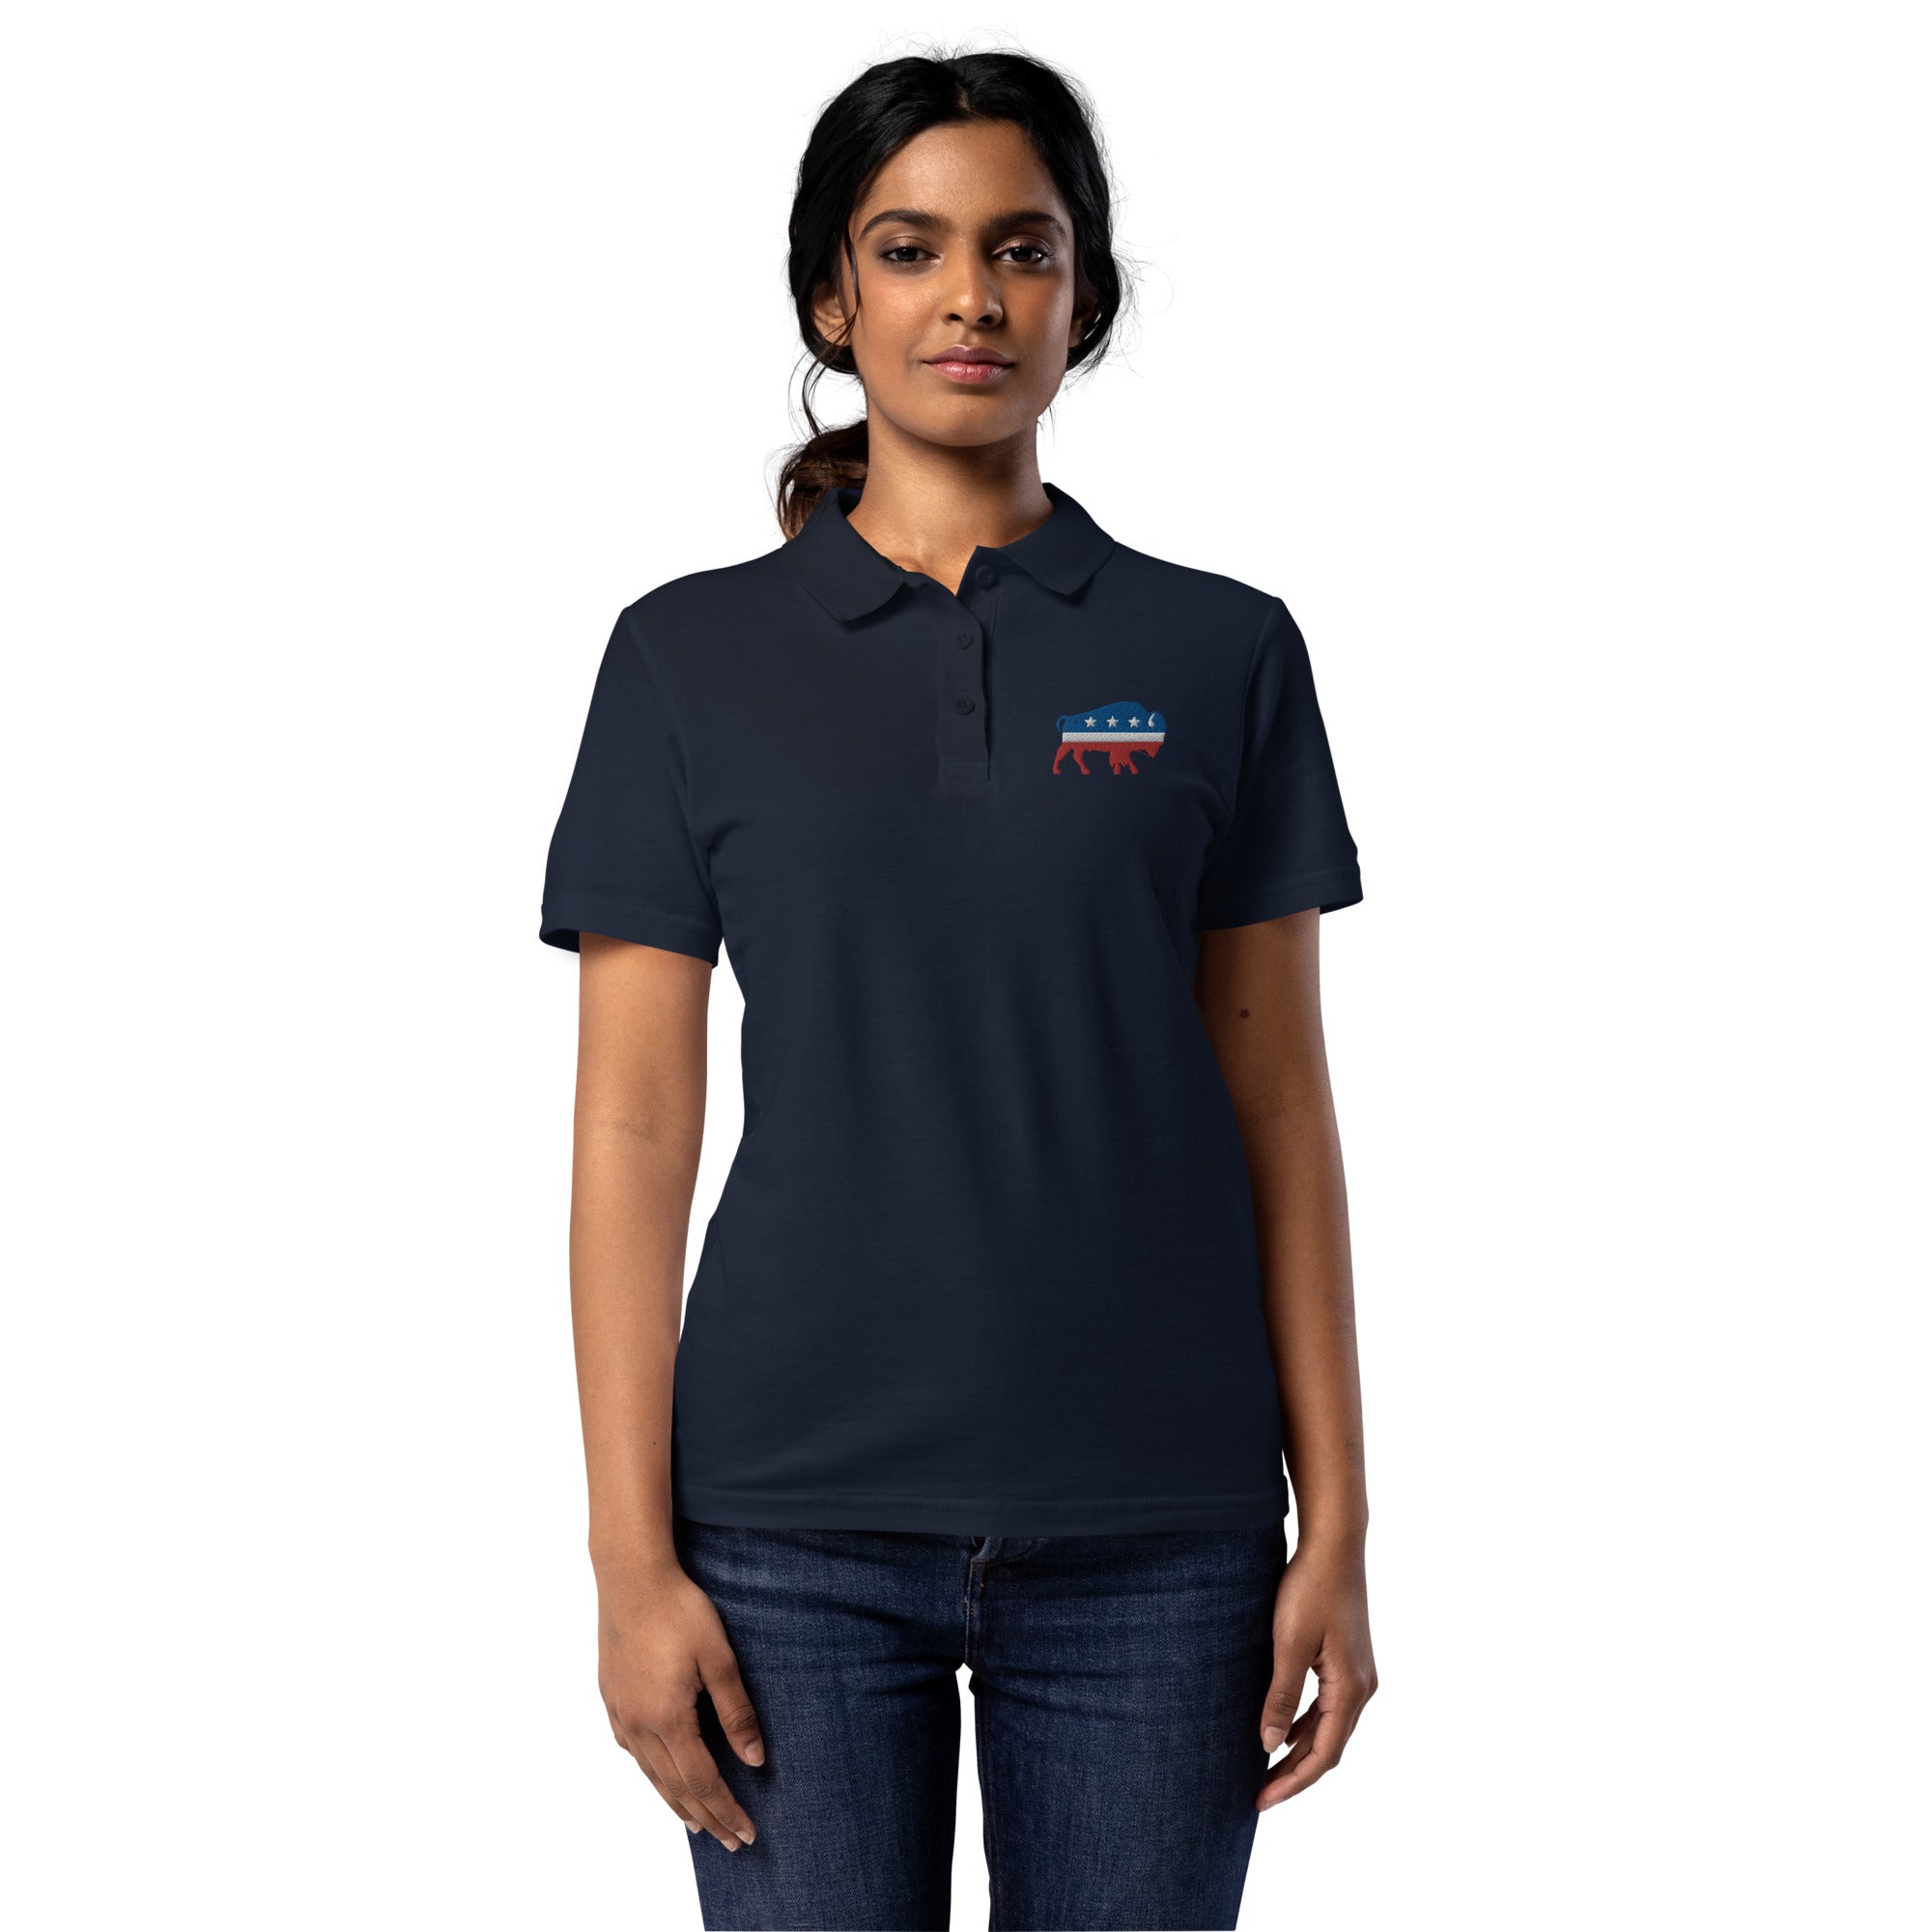 Independent Bison Women’s Pique Polo Shirt